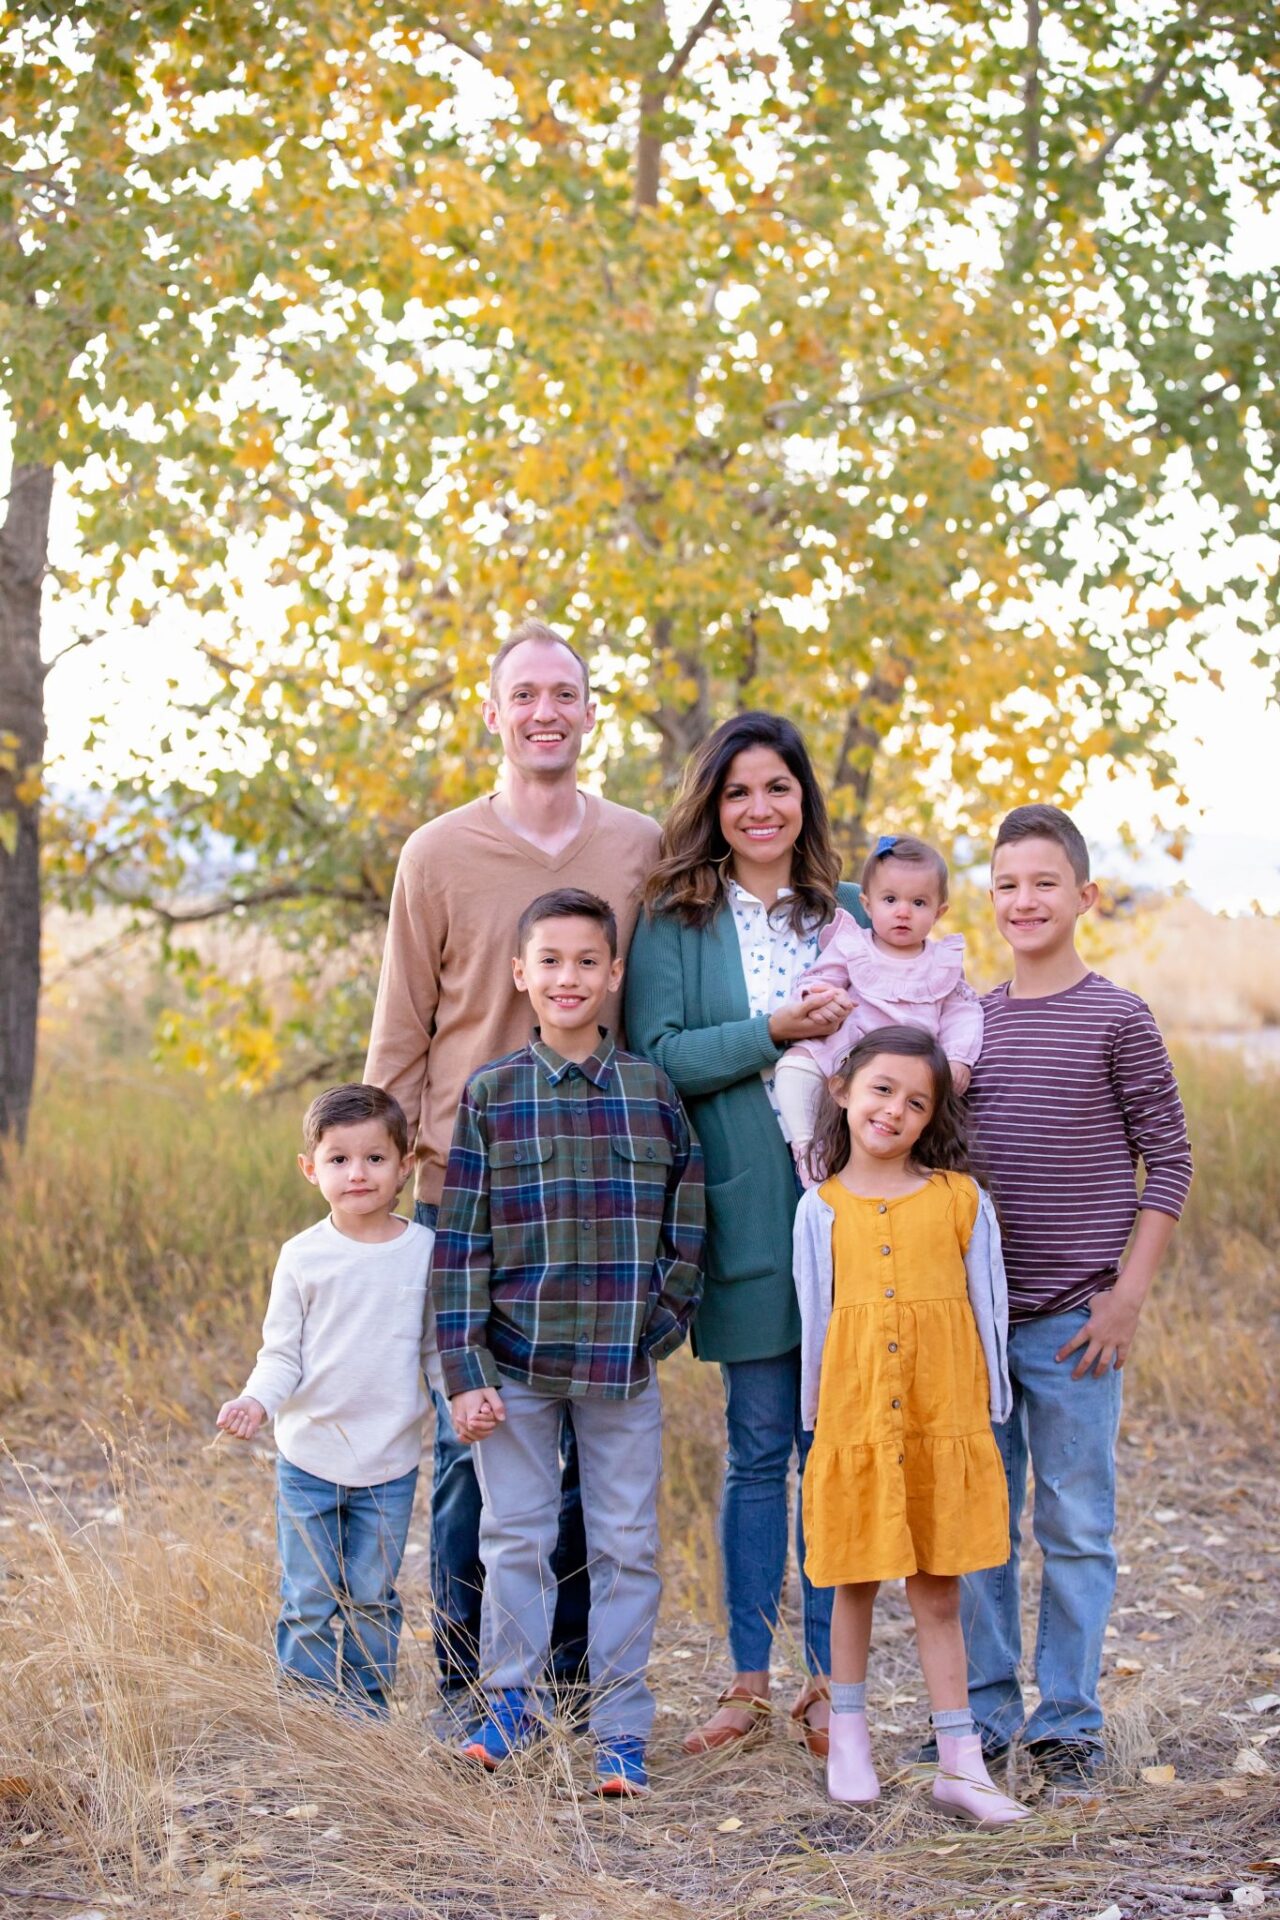 Family practice | Crane & Seager Orthodontics in Fort Collins and Loveland, CO